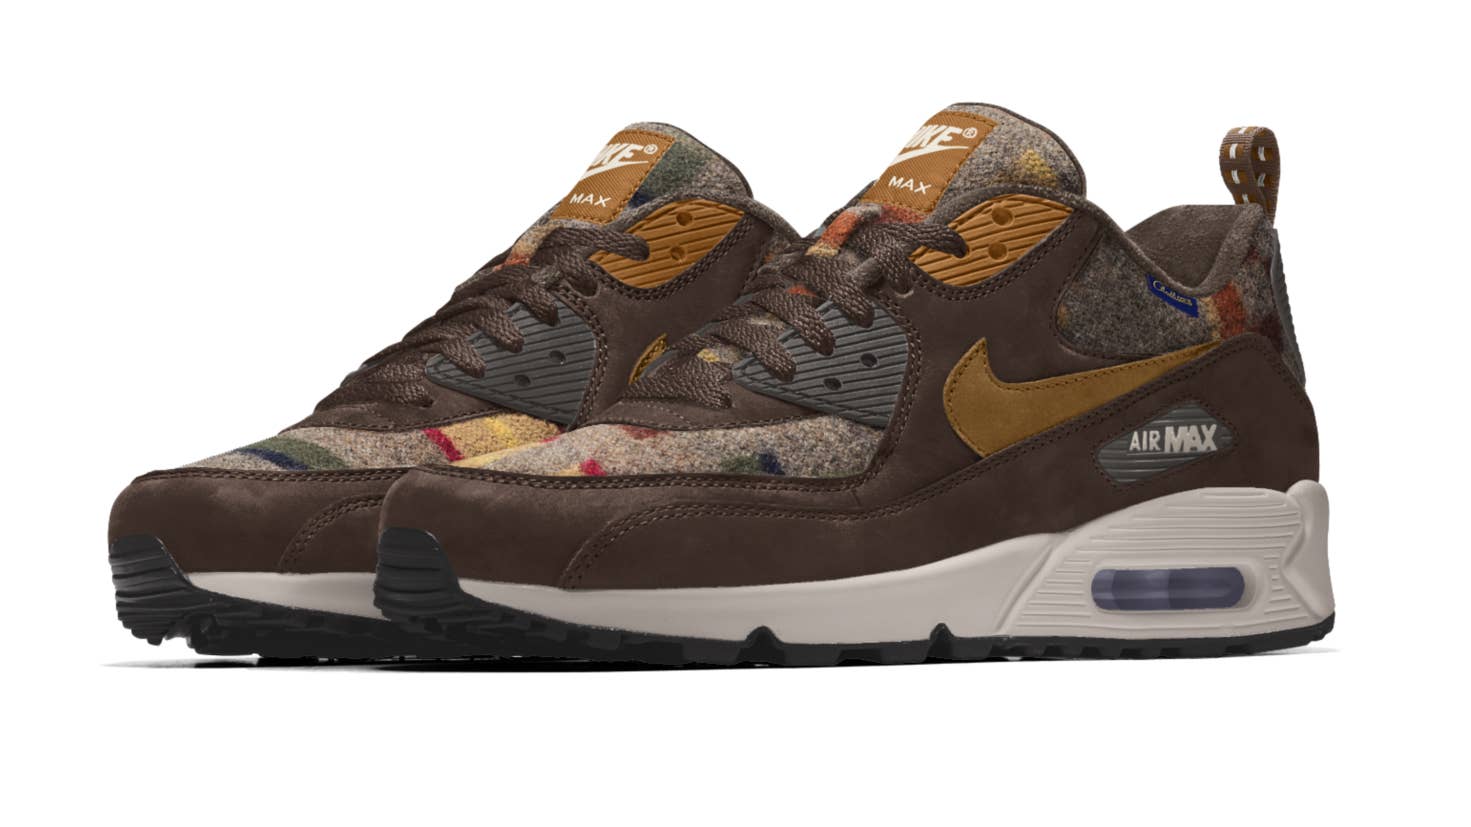 Enfriarse Noroeste gatear New Pendleton Air Max Options on Nike iD | Complex